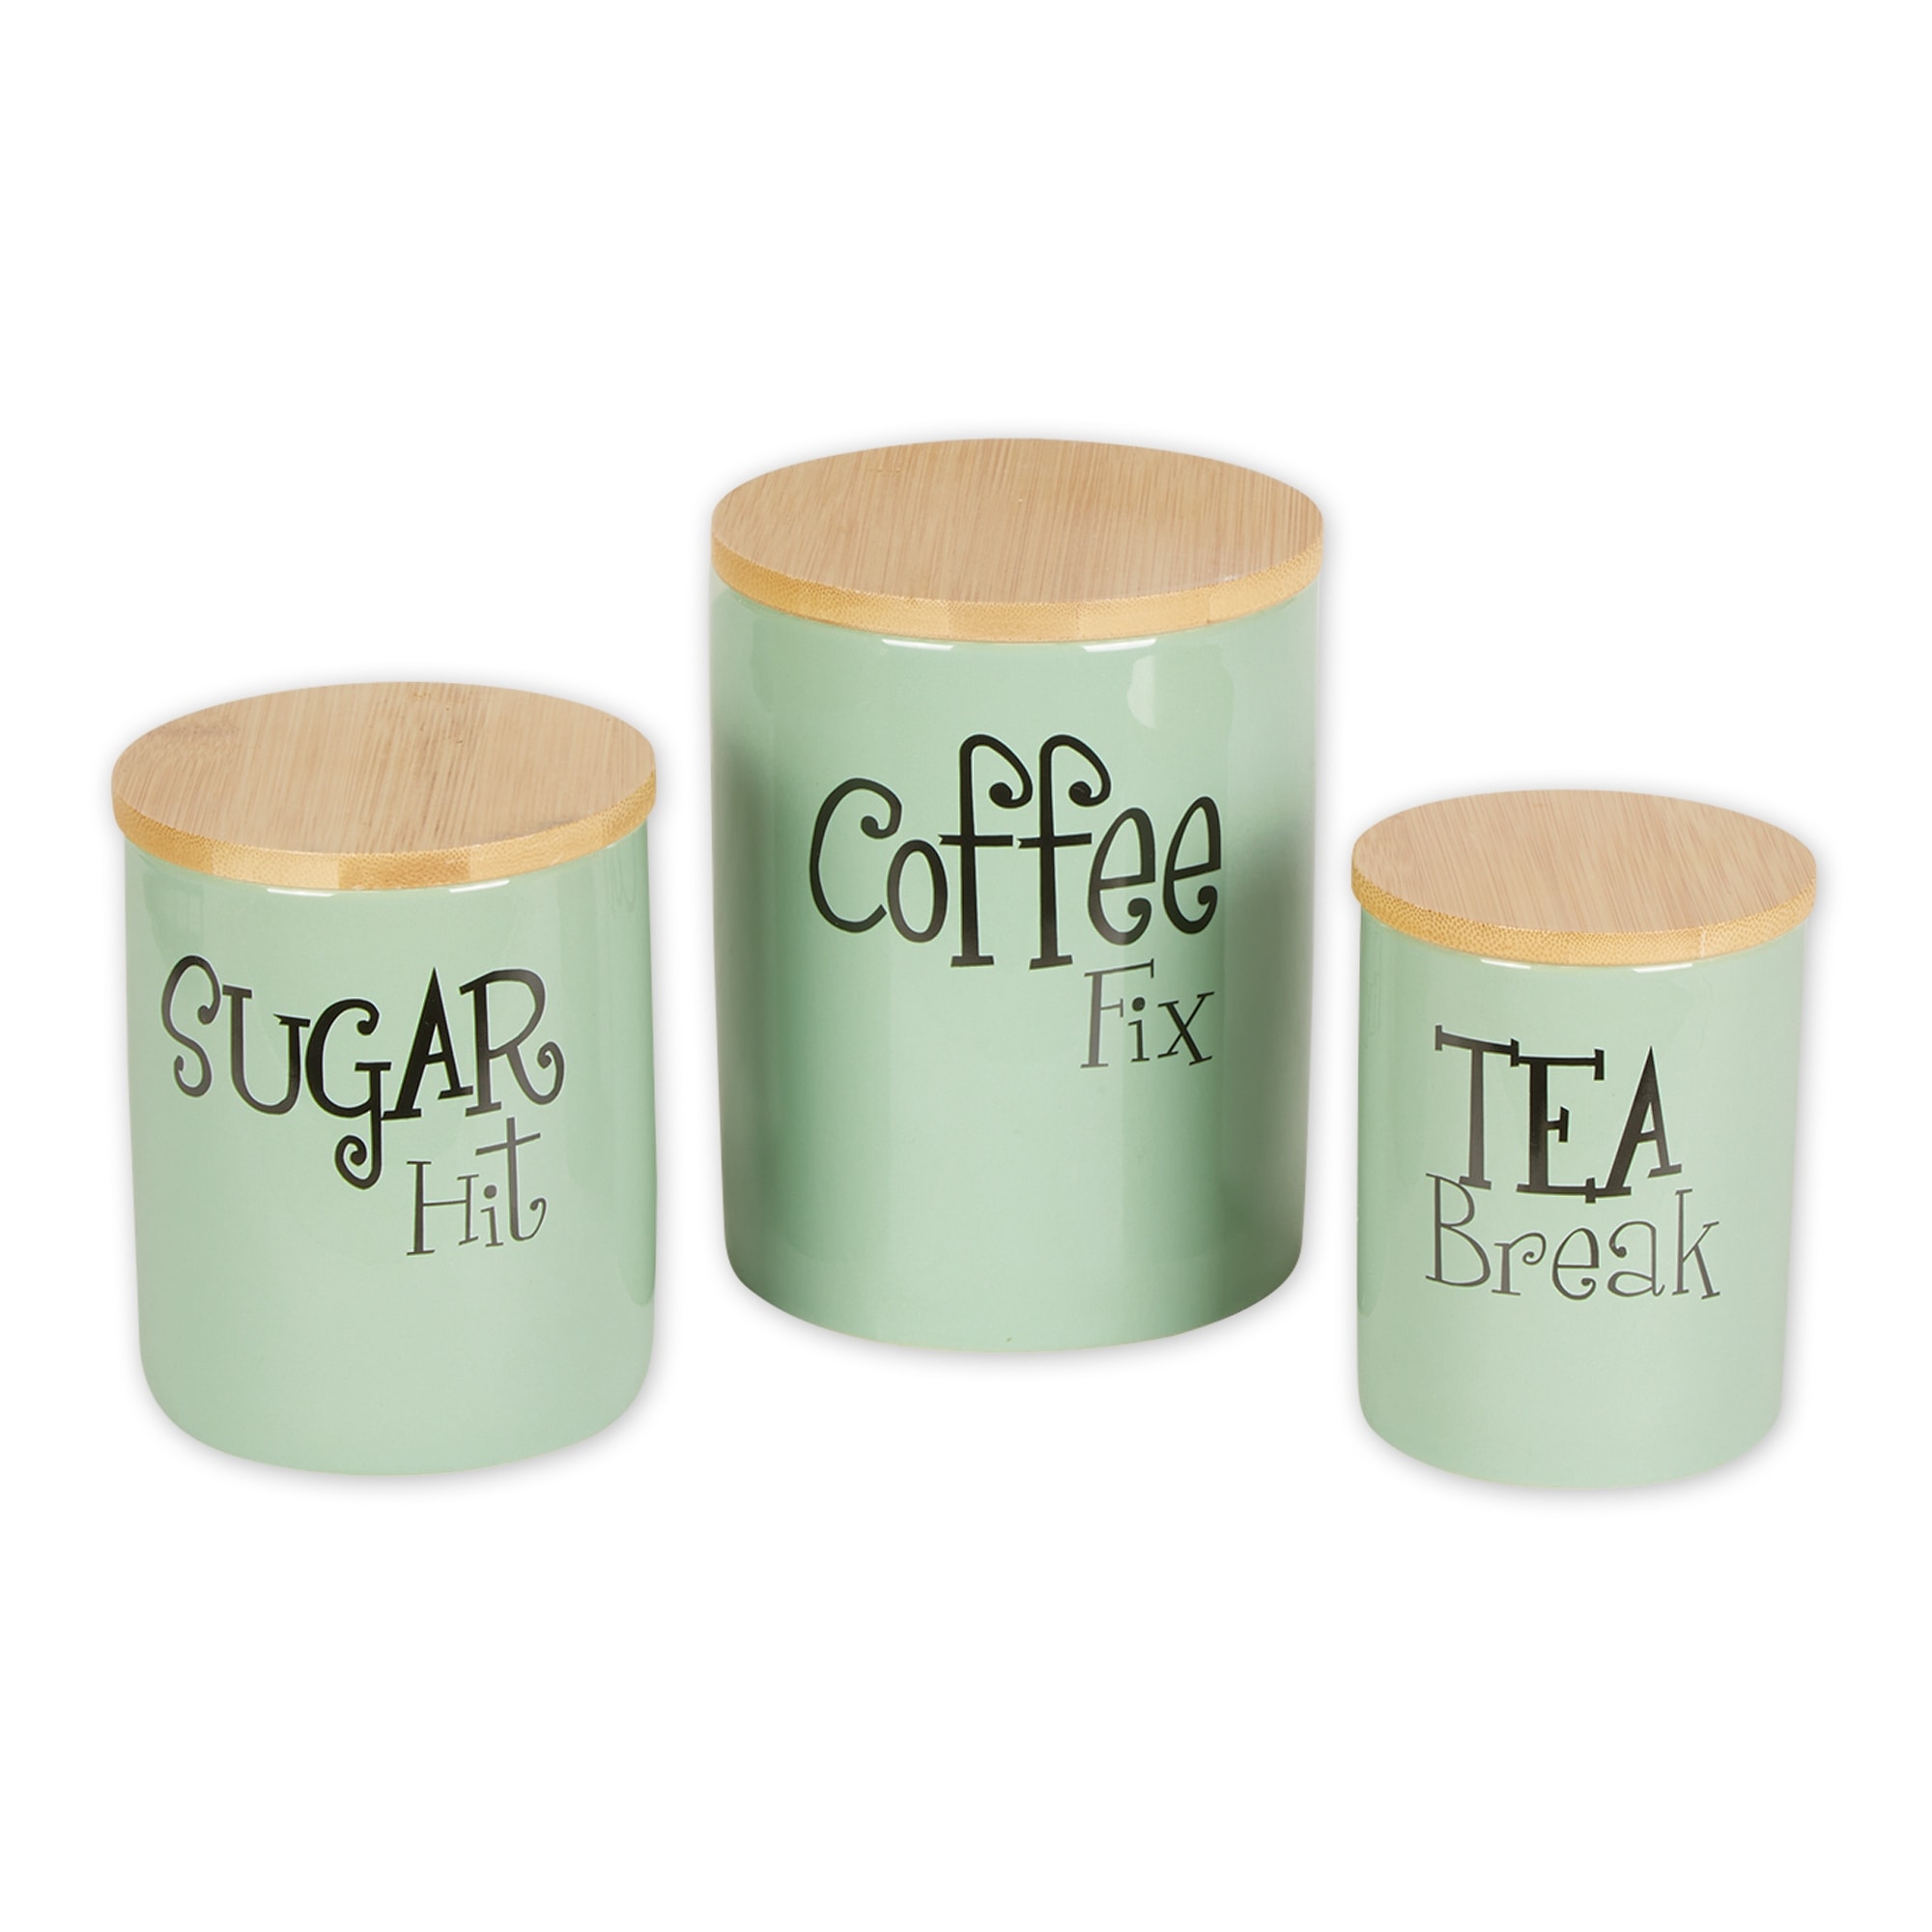 https://ak1.ostkcdn.com/images/products/is/images/direct/480c51c6376d0869e427dbdfb50efe3c338ffc02/DII-Coffee-Sugar-Tea-Ceramic-Canister-%28Set-of-3%29.jpg